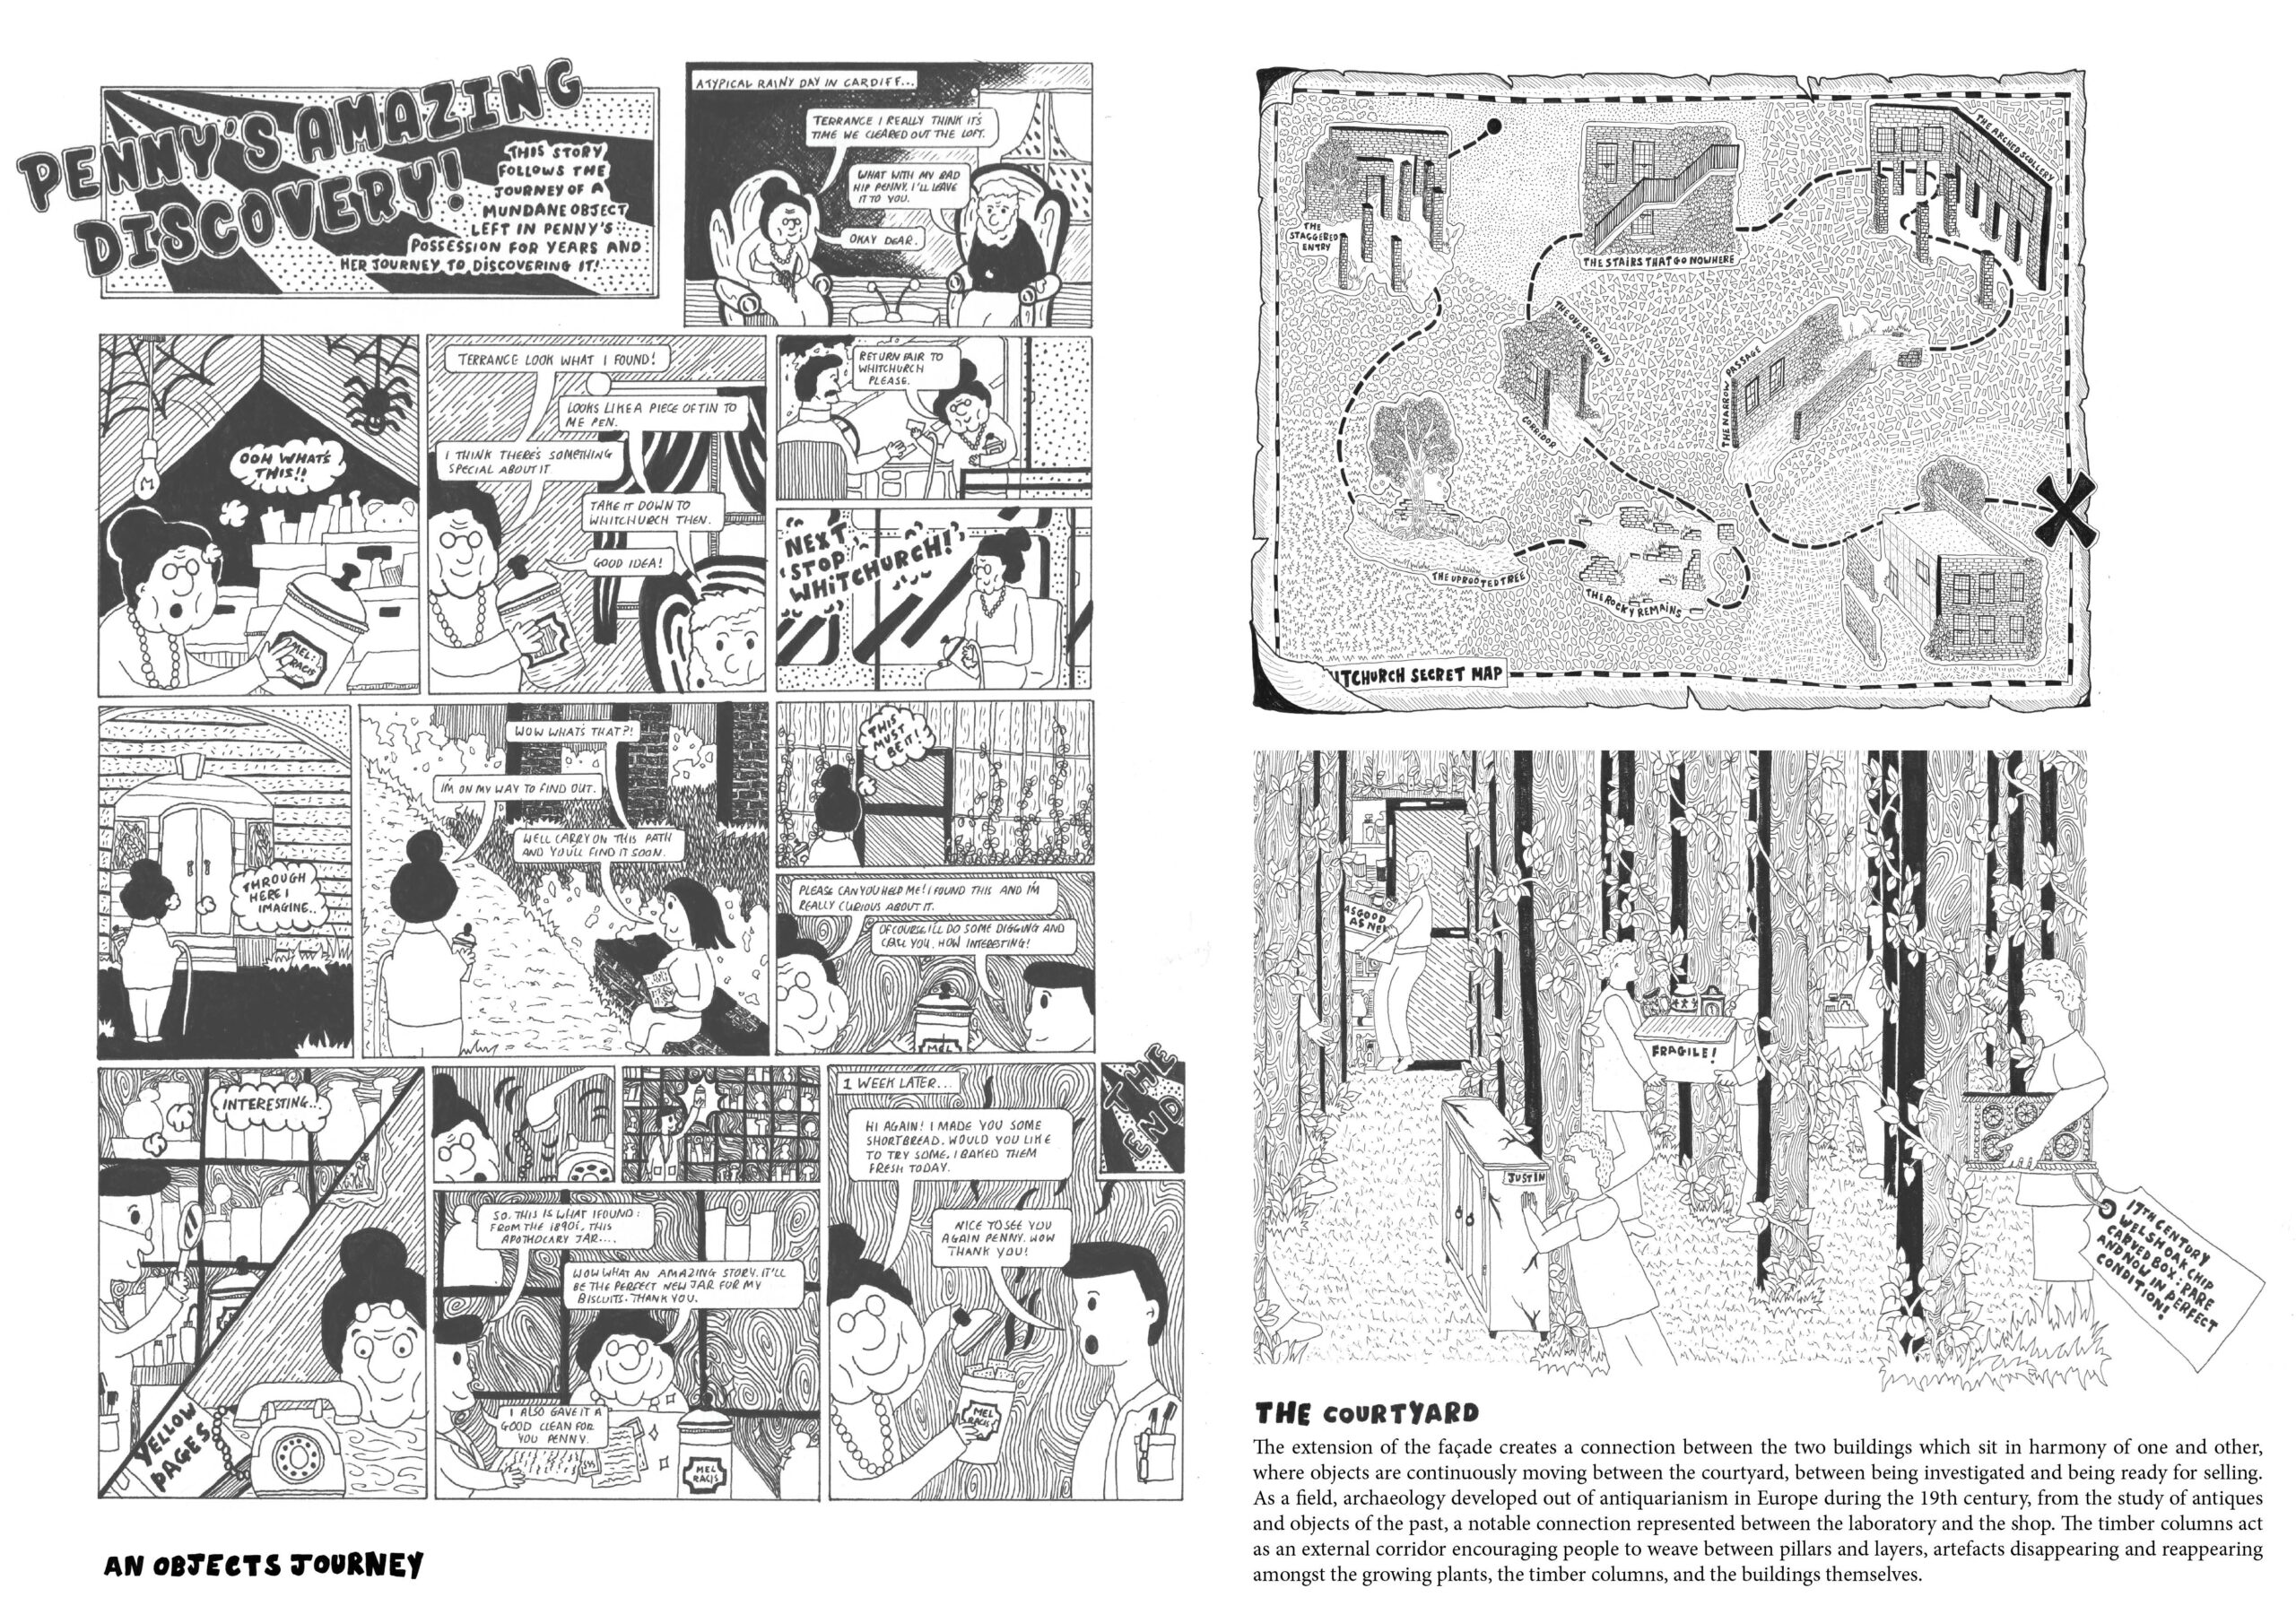 Portfolio Page with a comic of an objects journey to Whitchurch and a perspective drawing of the courtyard space.